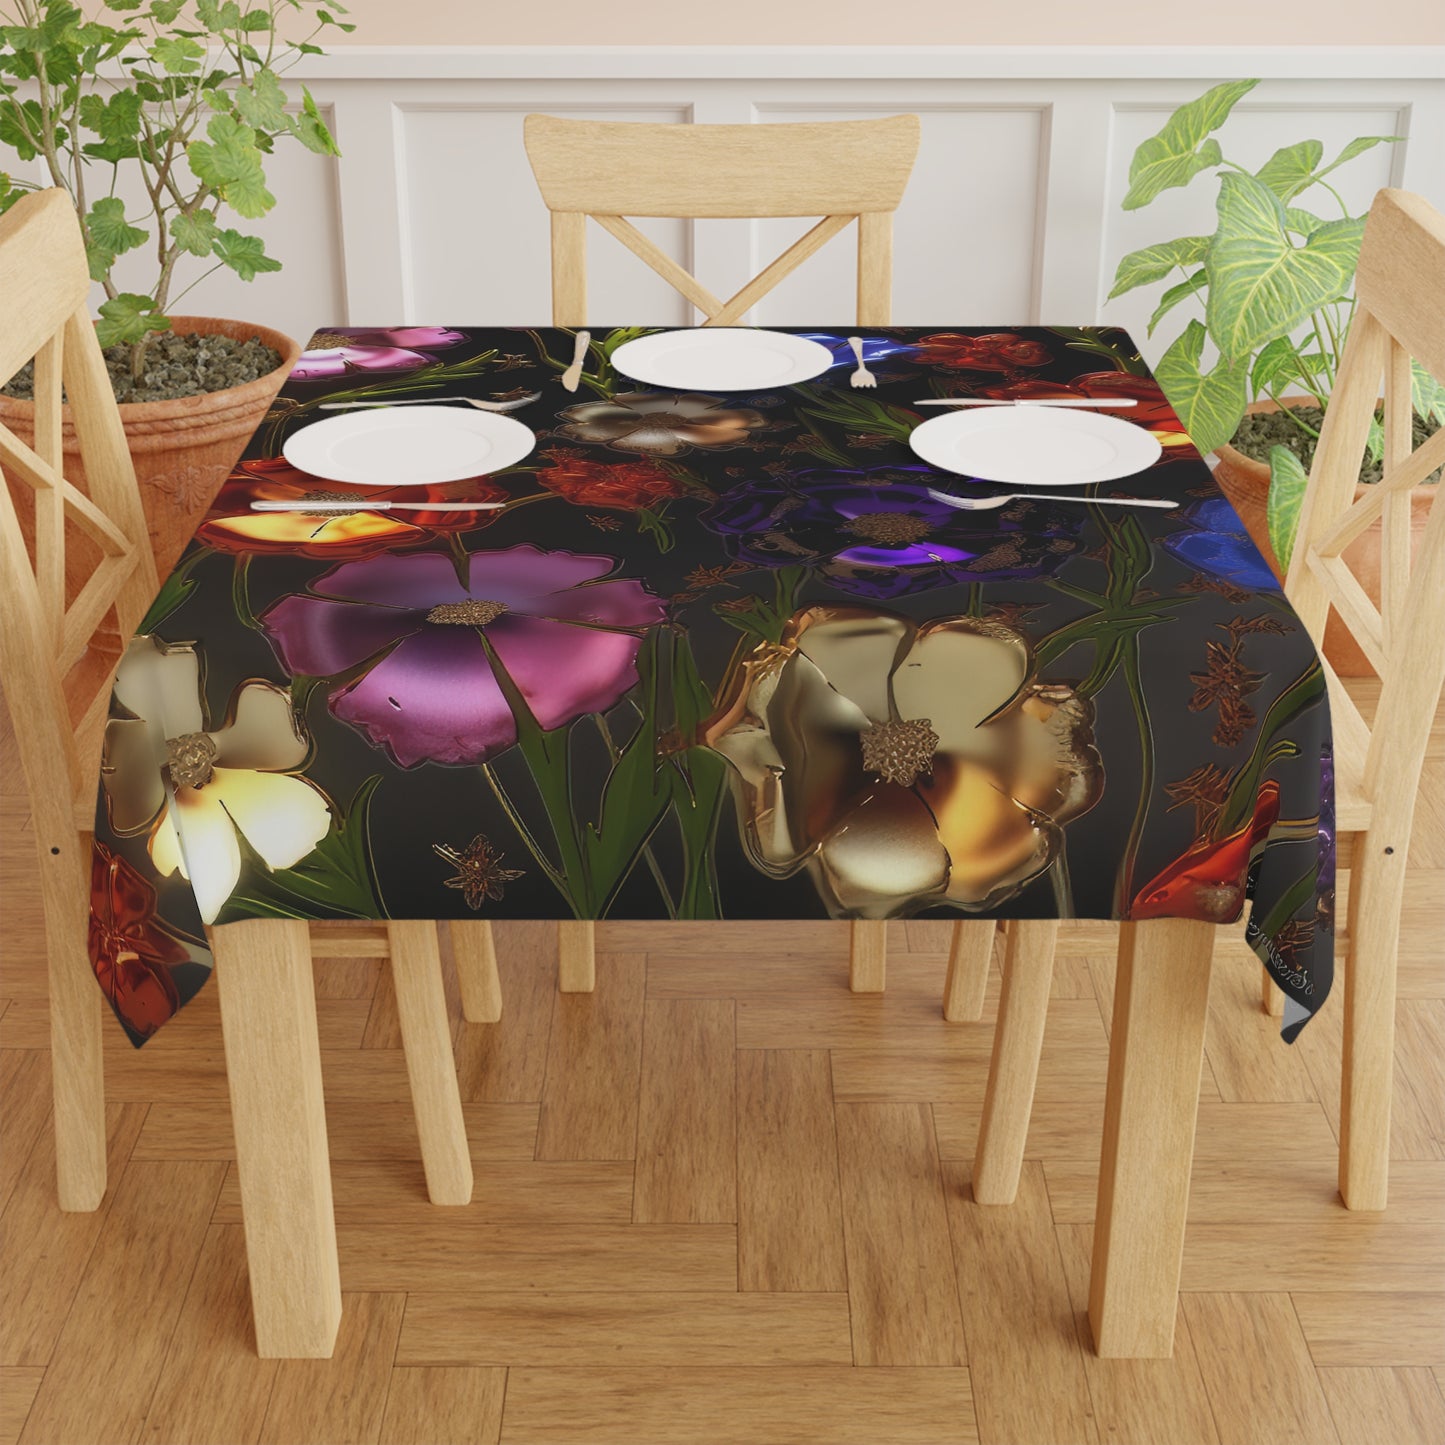 Bold & Beautiful & Metallic Wildflowers, Gorgeous floral Design, Style 7 Tablecloth